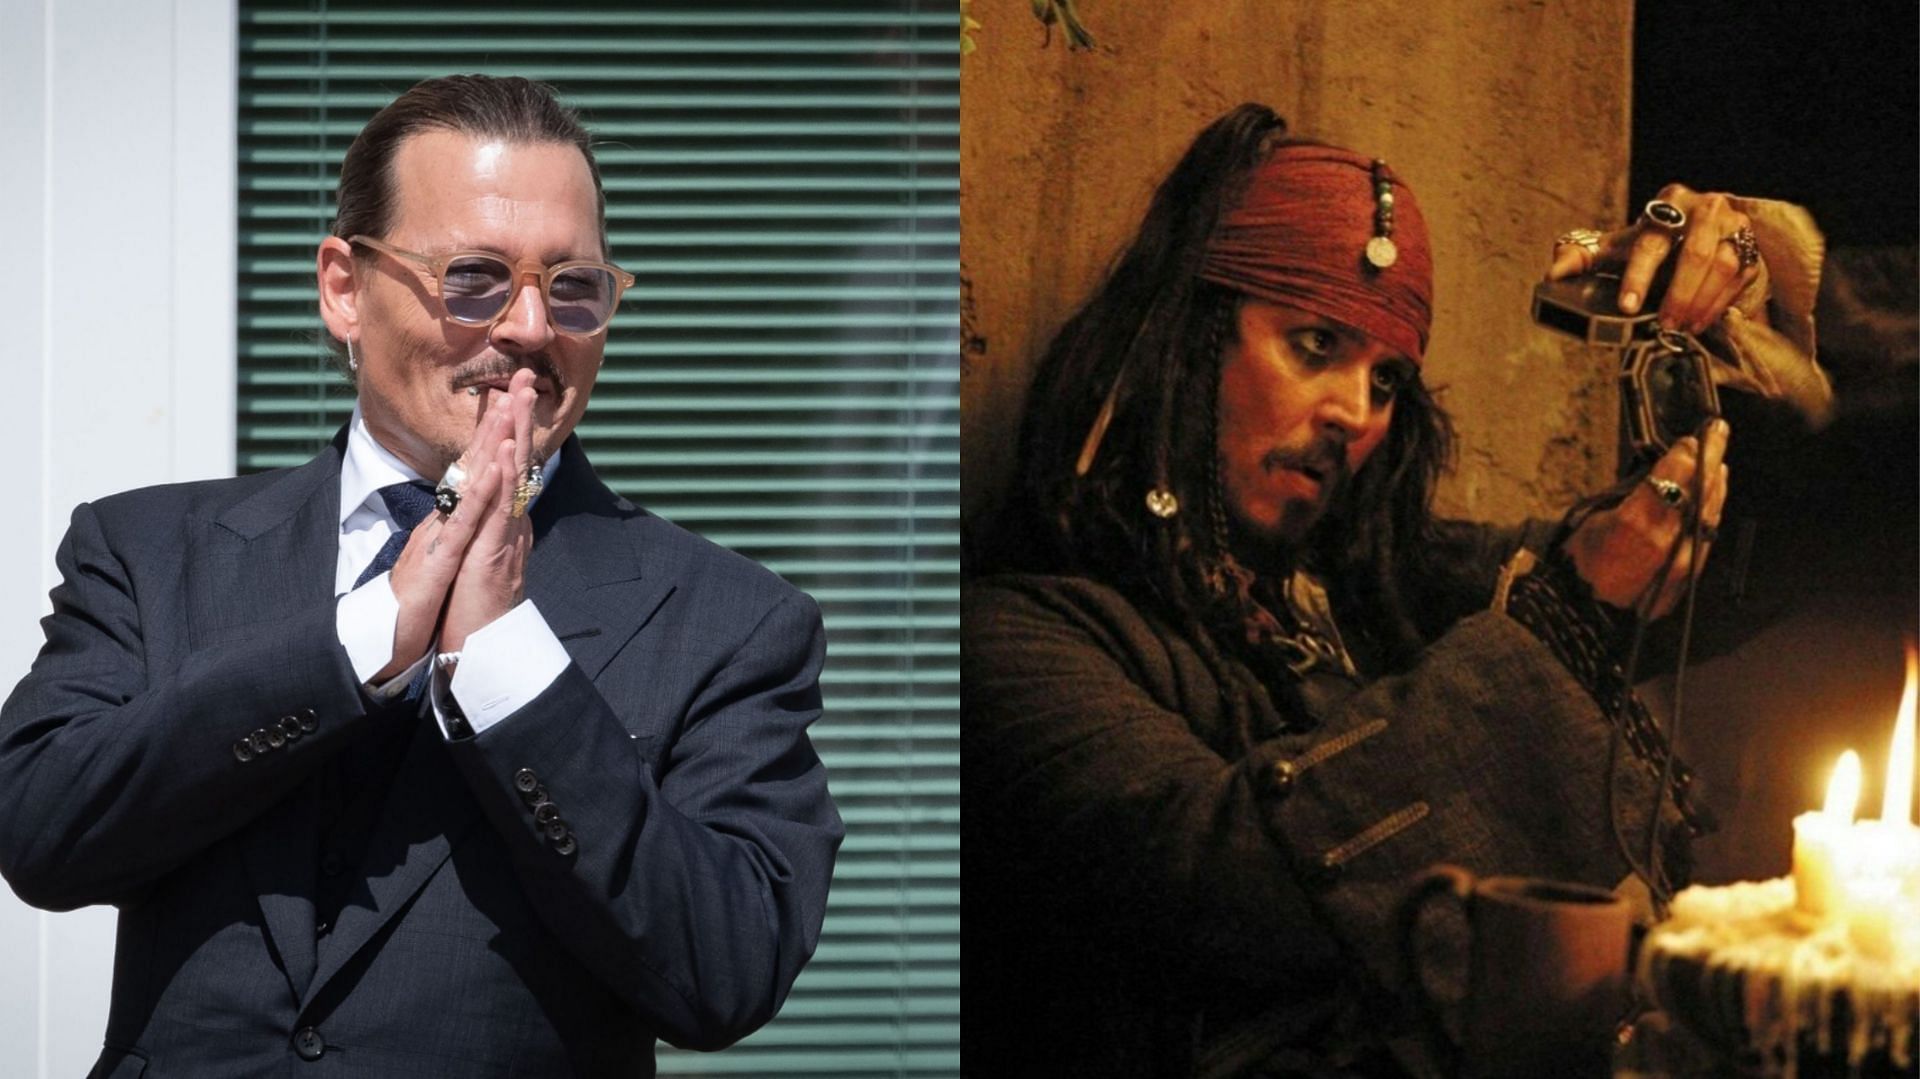 Johnny Depp had previously stated that he would not work with Disney Studios even if they offer him a $300 million paycheck. (Image via Getty Images/Cliff Owen, Twitter/@genevieghost)